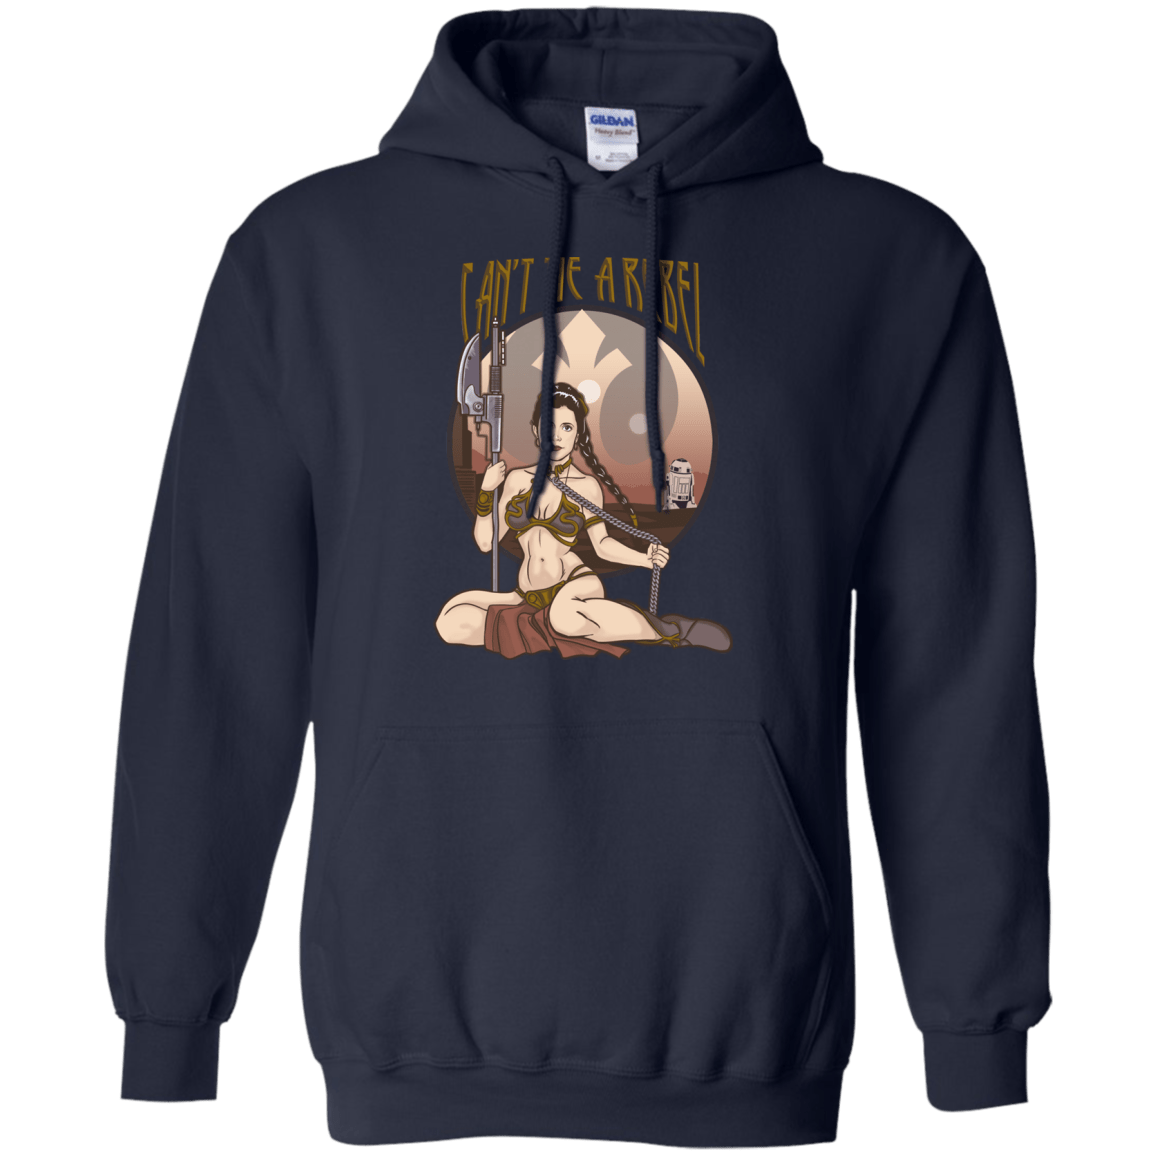 Sweatshirts Navy / Small Can't Tie a Rebel Pullover Hoodie